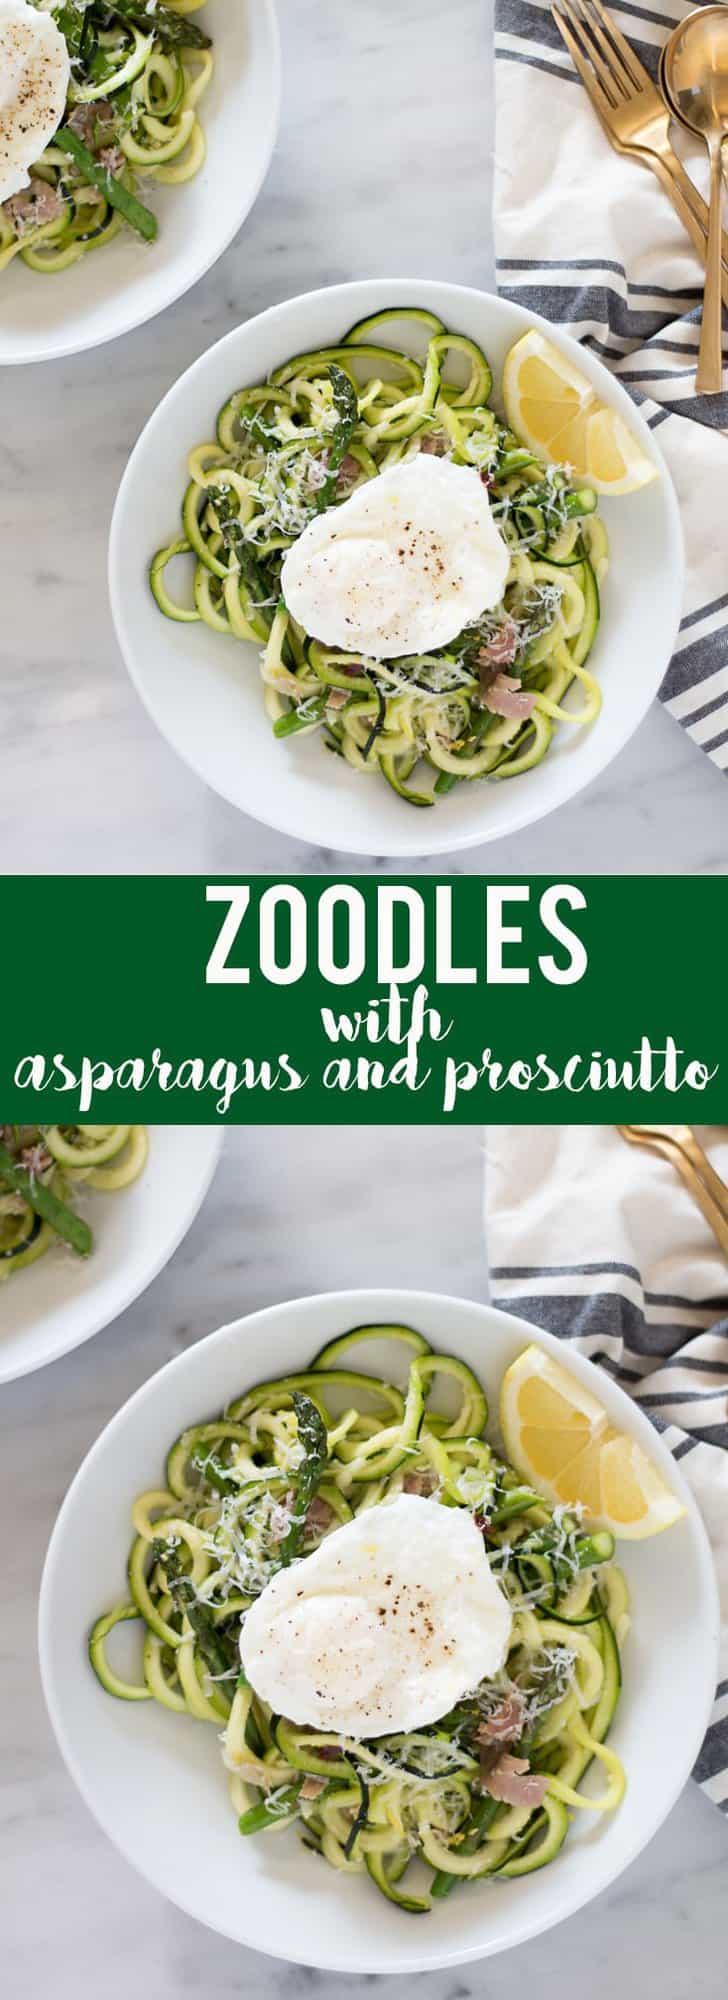 Zoodles (zucchini noodles) quick cooked with asparagus, prosciutto, parmesan cheese, lemon and white wine all topped with a poached egg make a quick and light spring meal.